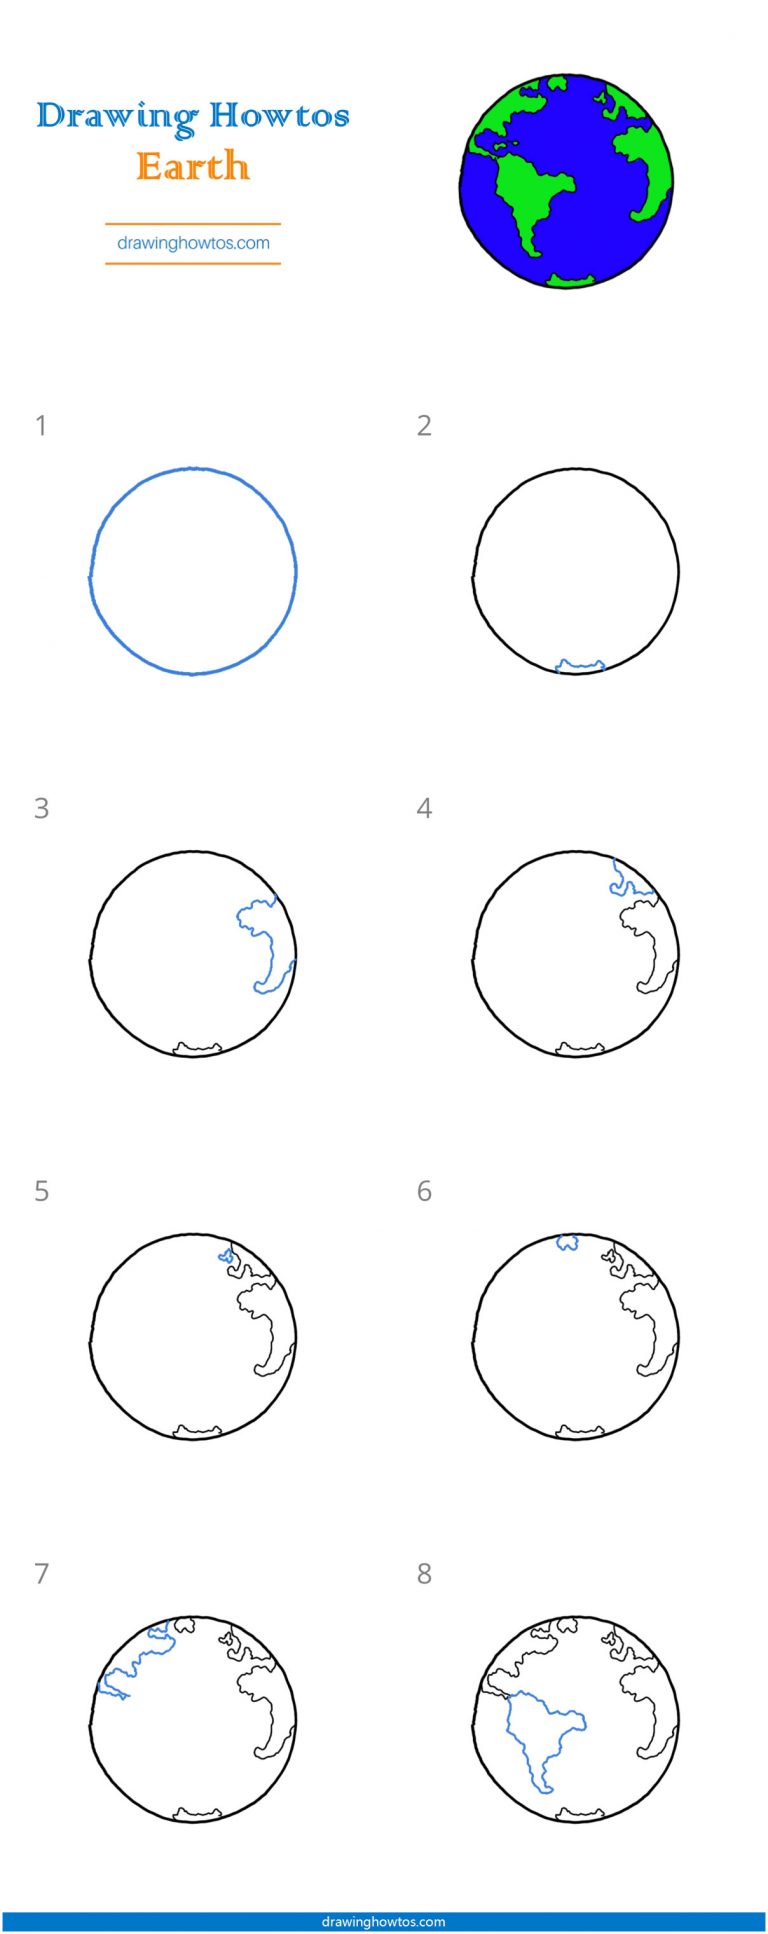 Top How To Draw Earth Step By Step of the decade Learn more here 